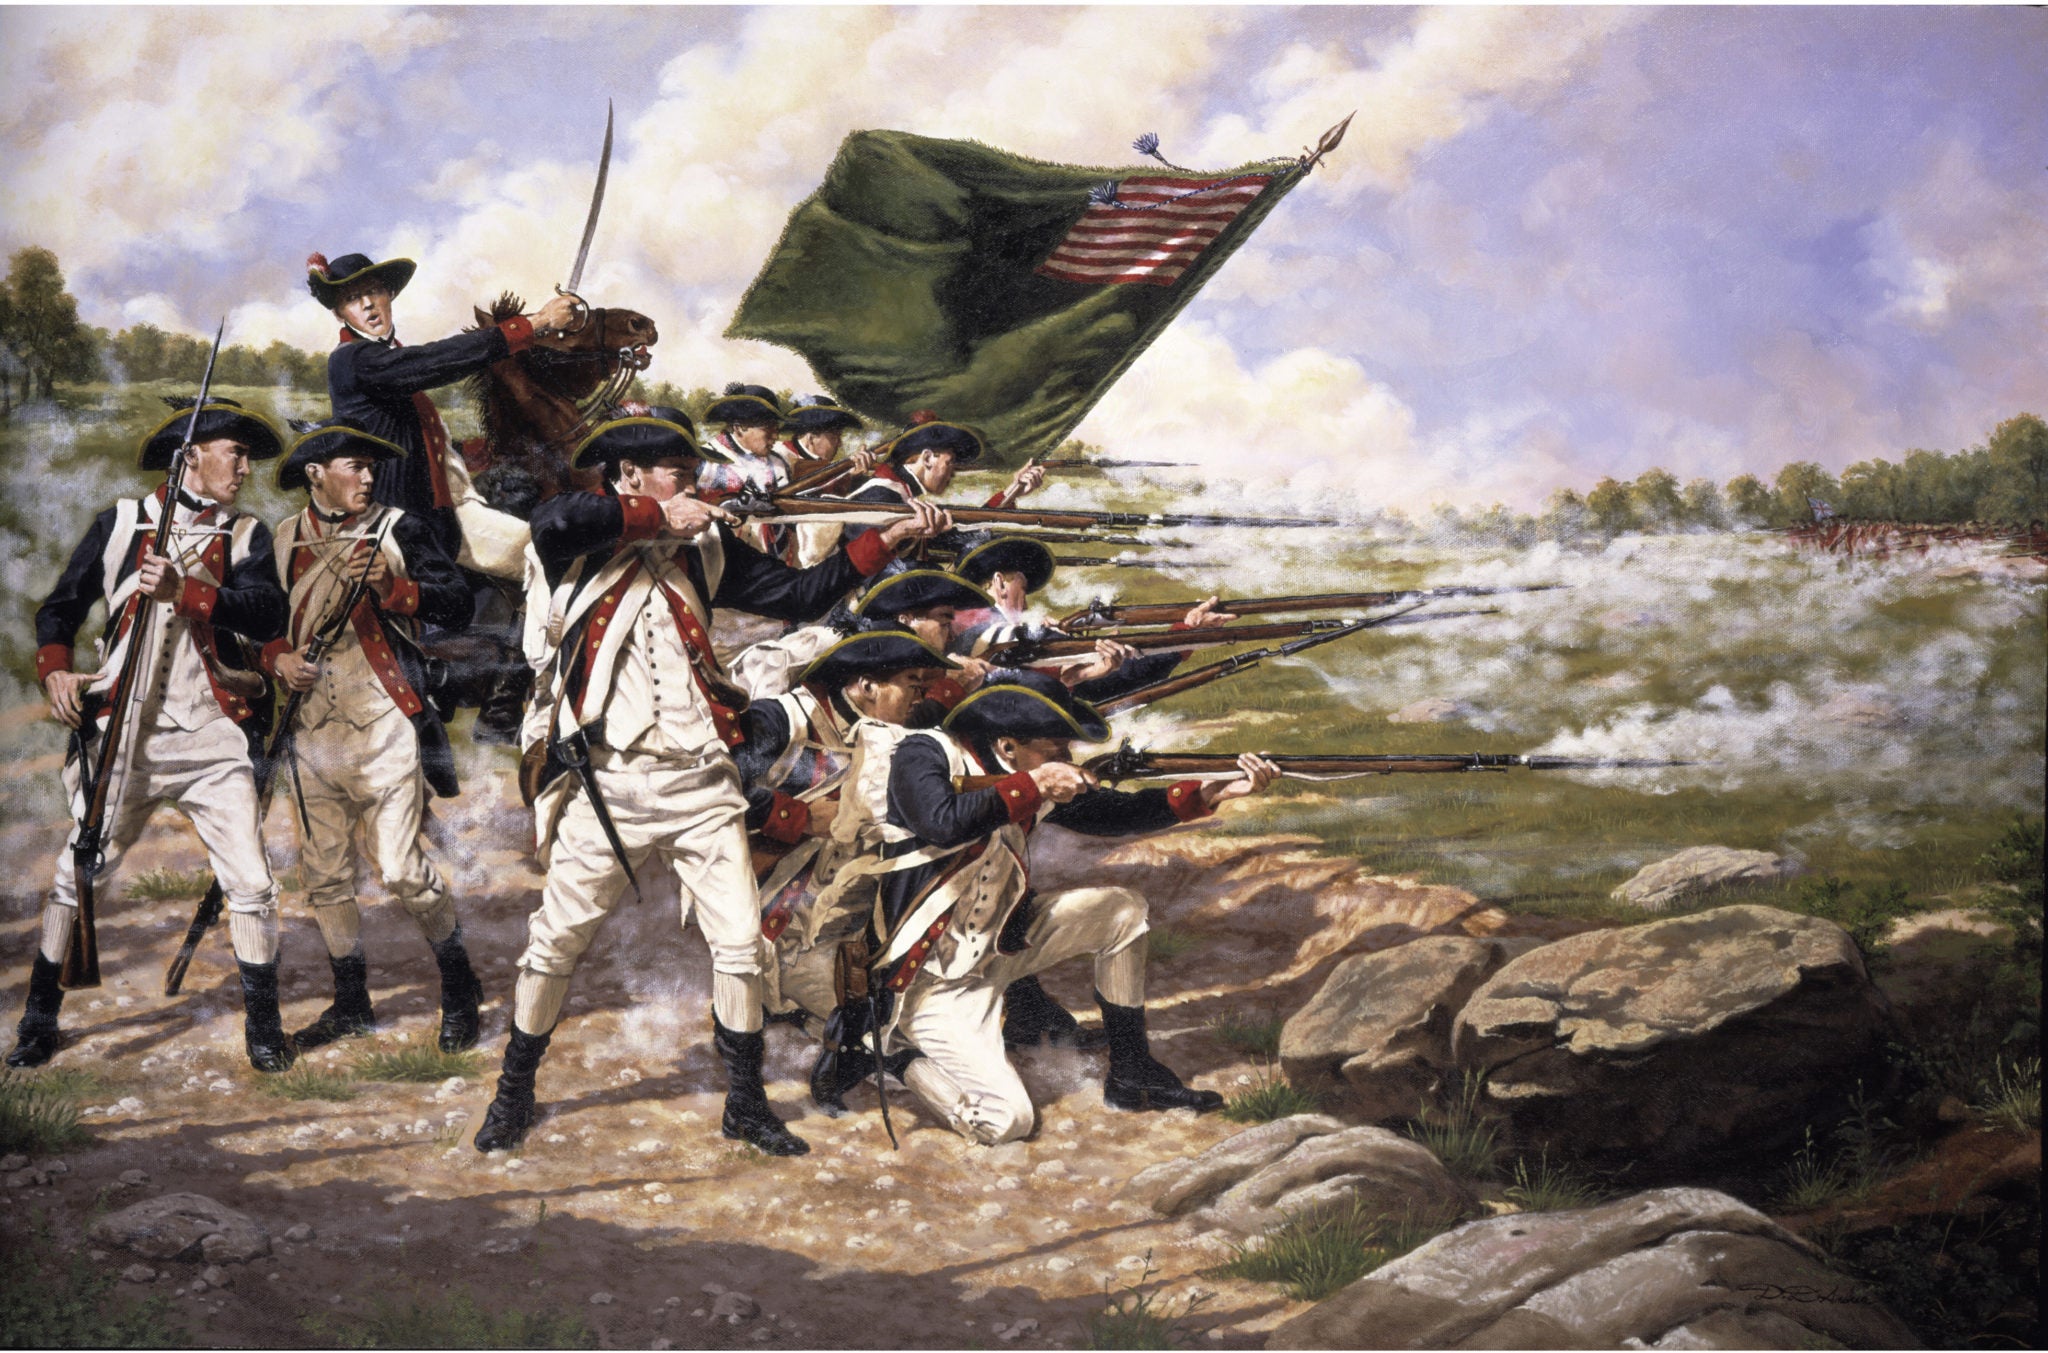 Troops fire in line during the Revolutionary War, defeating the British plan. 